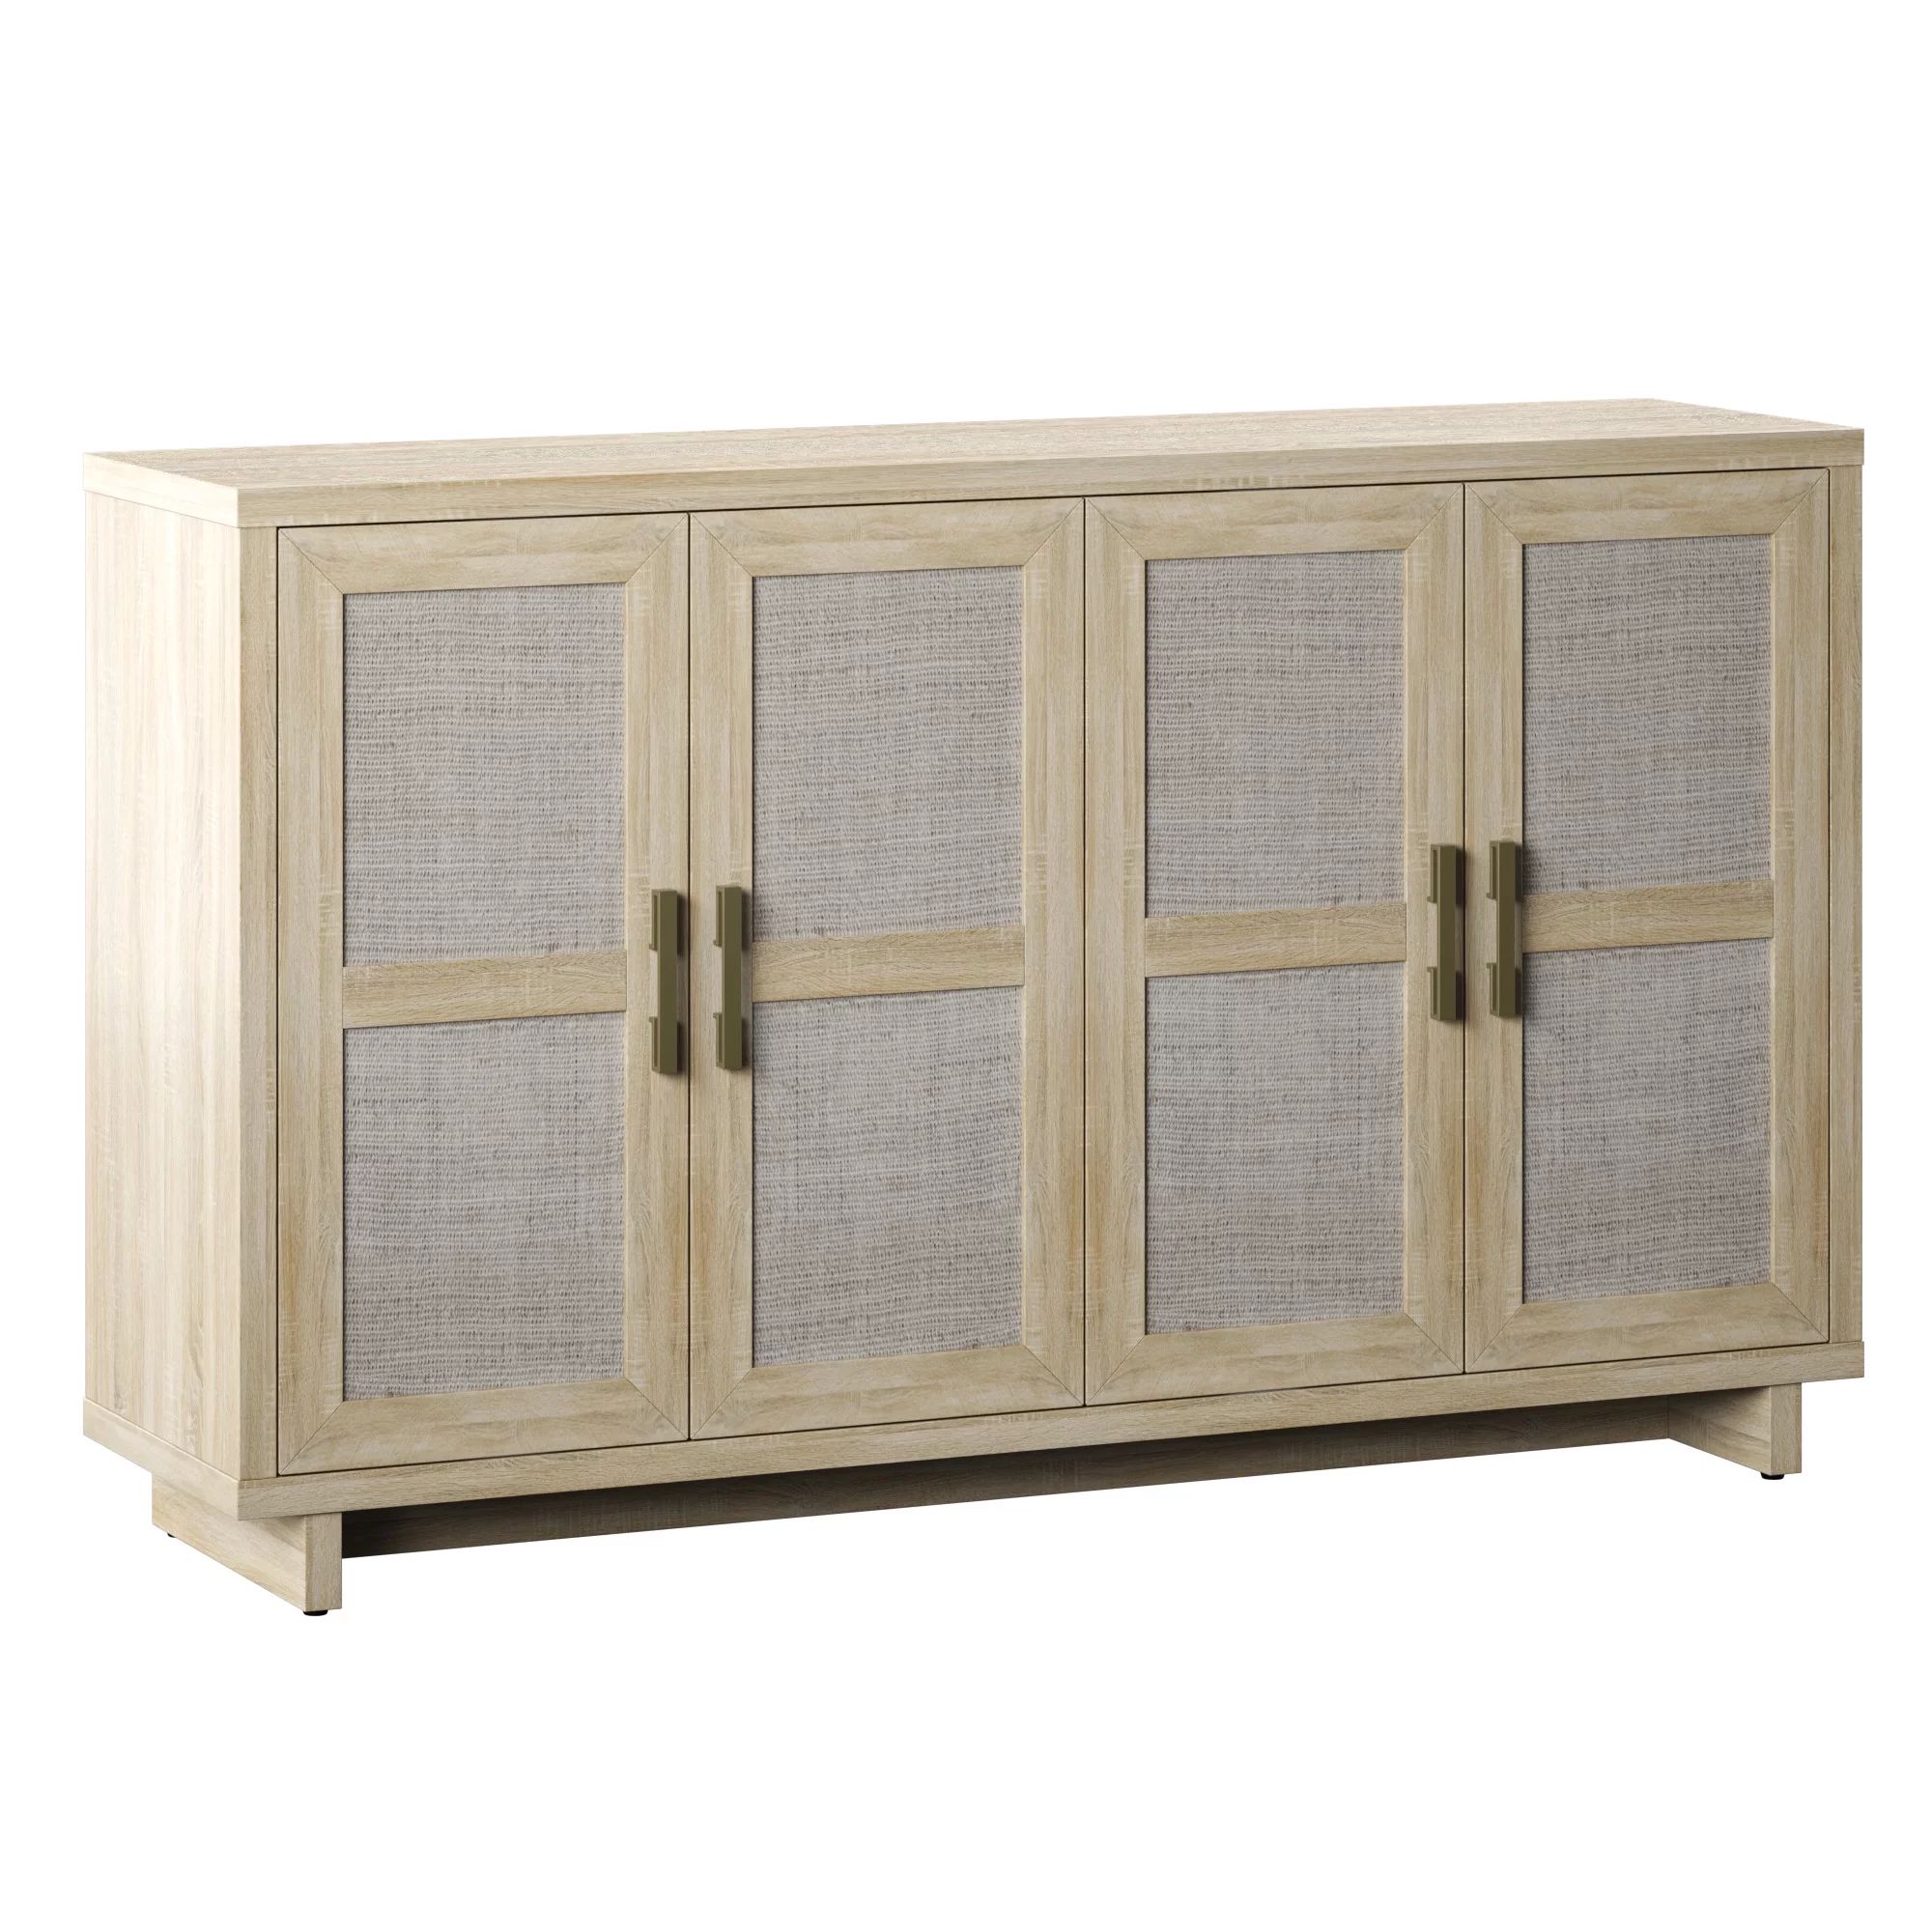 Coastal Sideboard with Linen Inspired Accents | Walmart (US)